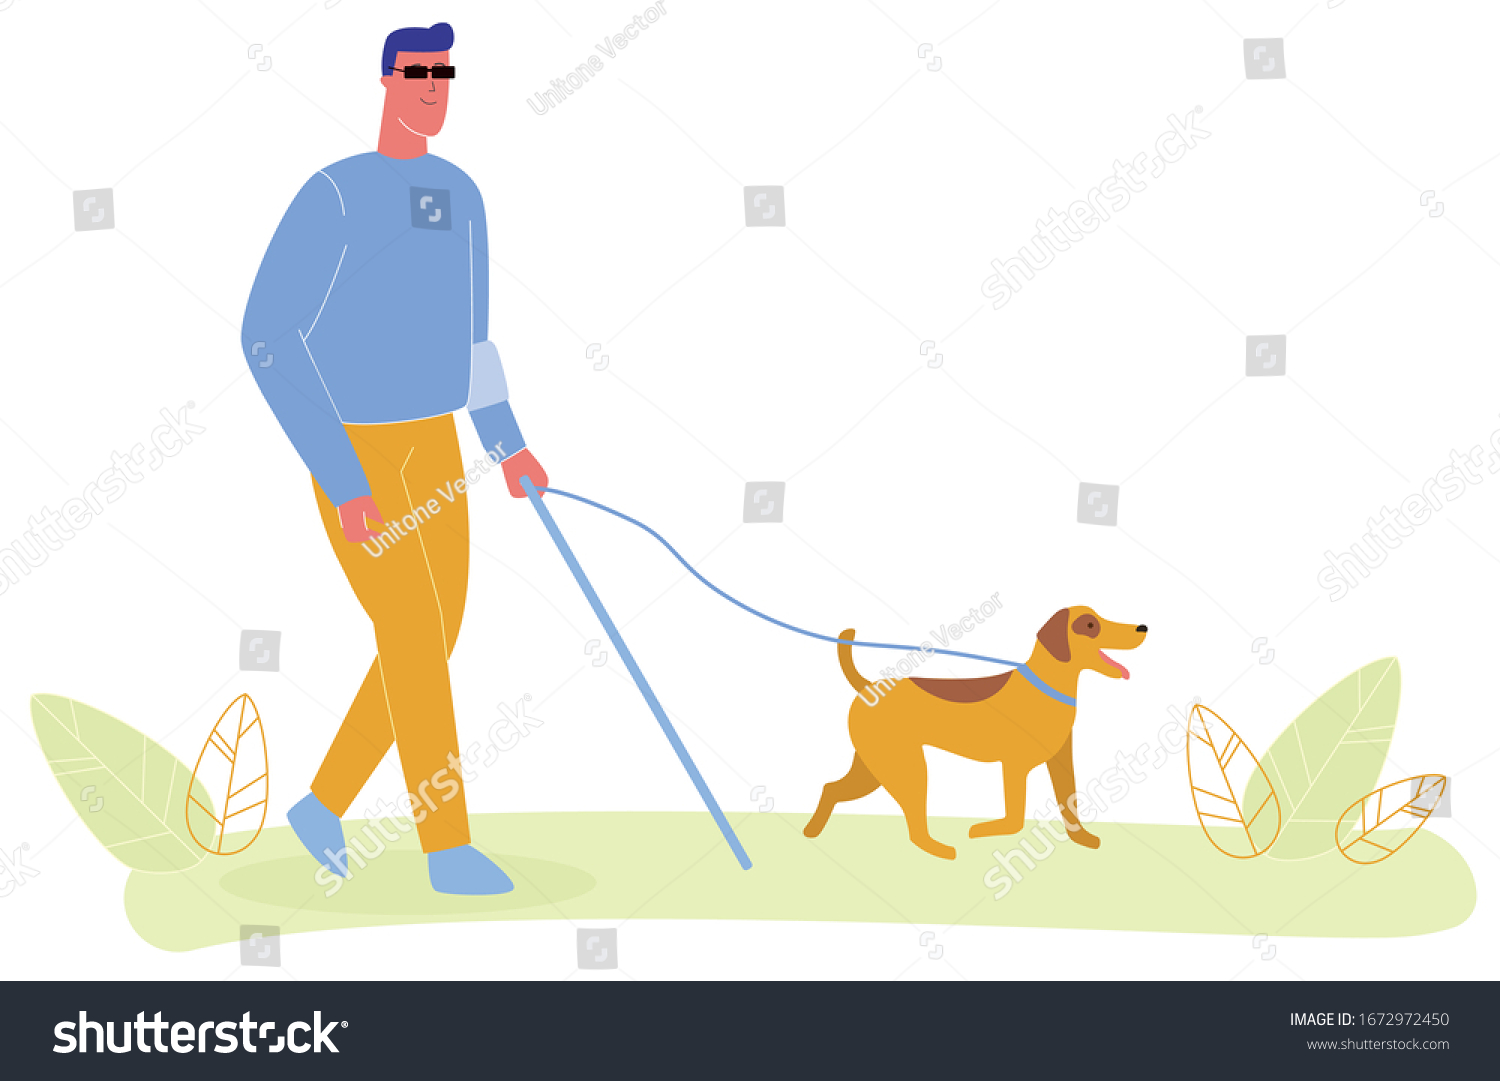 SVG of Blind Man in Glasses Walk with Cane Vector Illustration. Service Dog on Leash, Guide Assistance. Trained Animal Help, Blindness Support. Disabled Rehabilitation. Handicacapped Accessibility svg